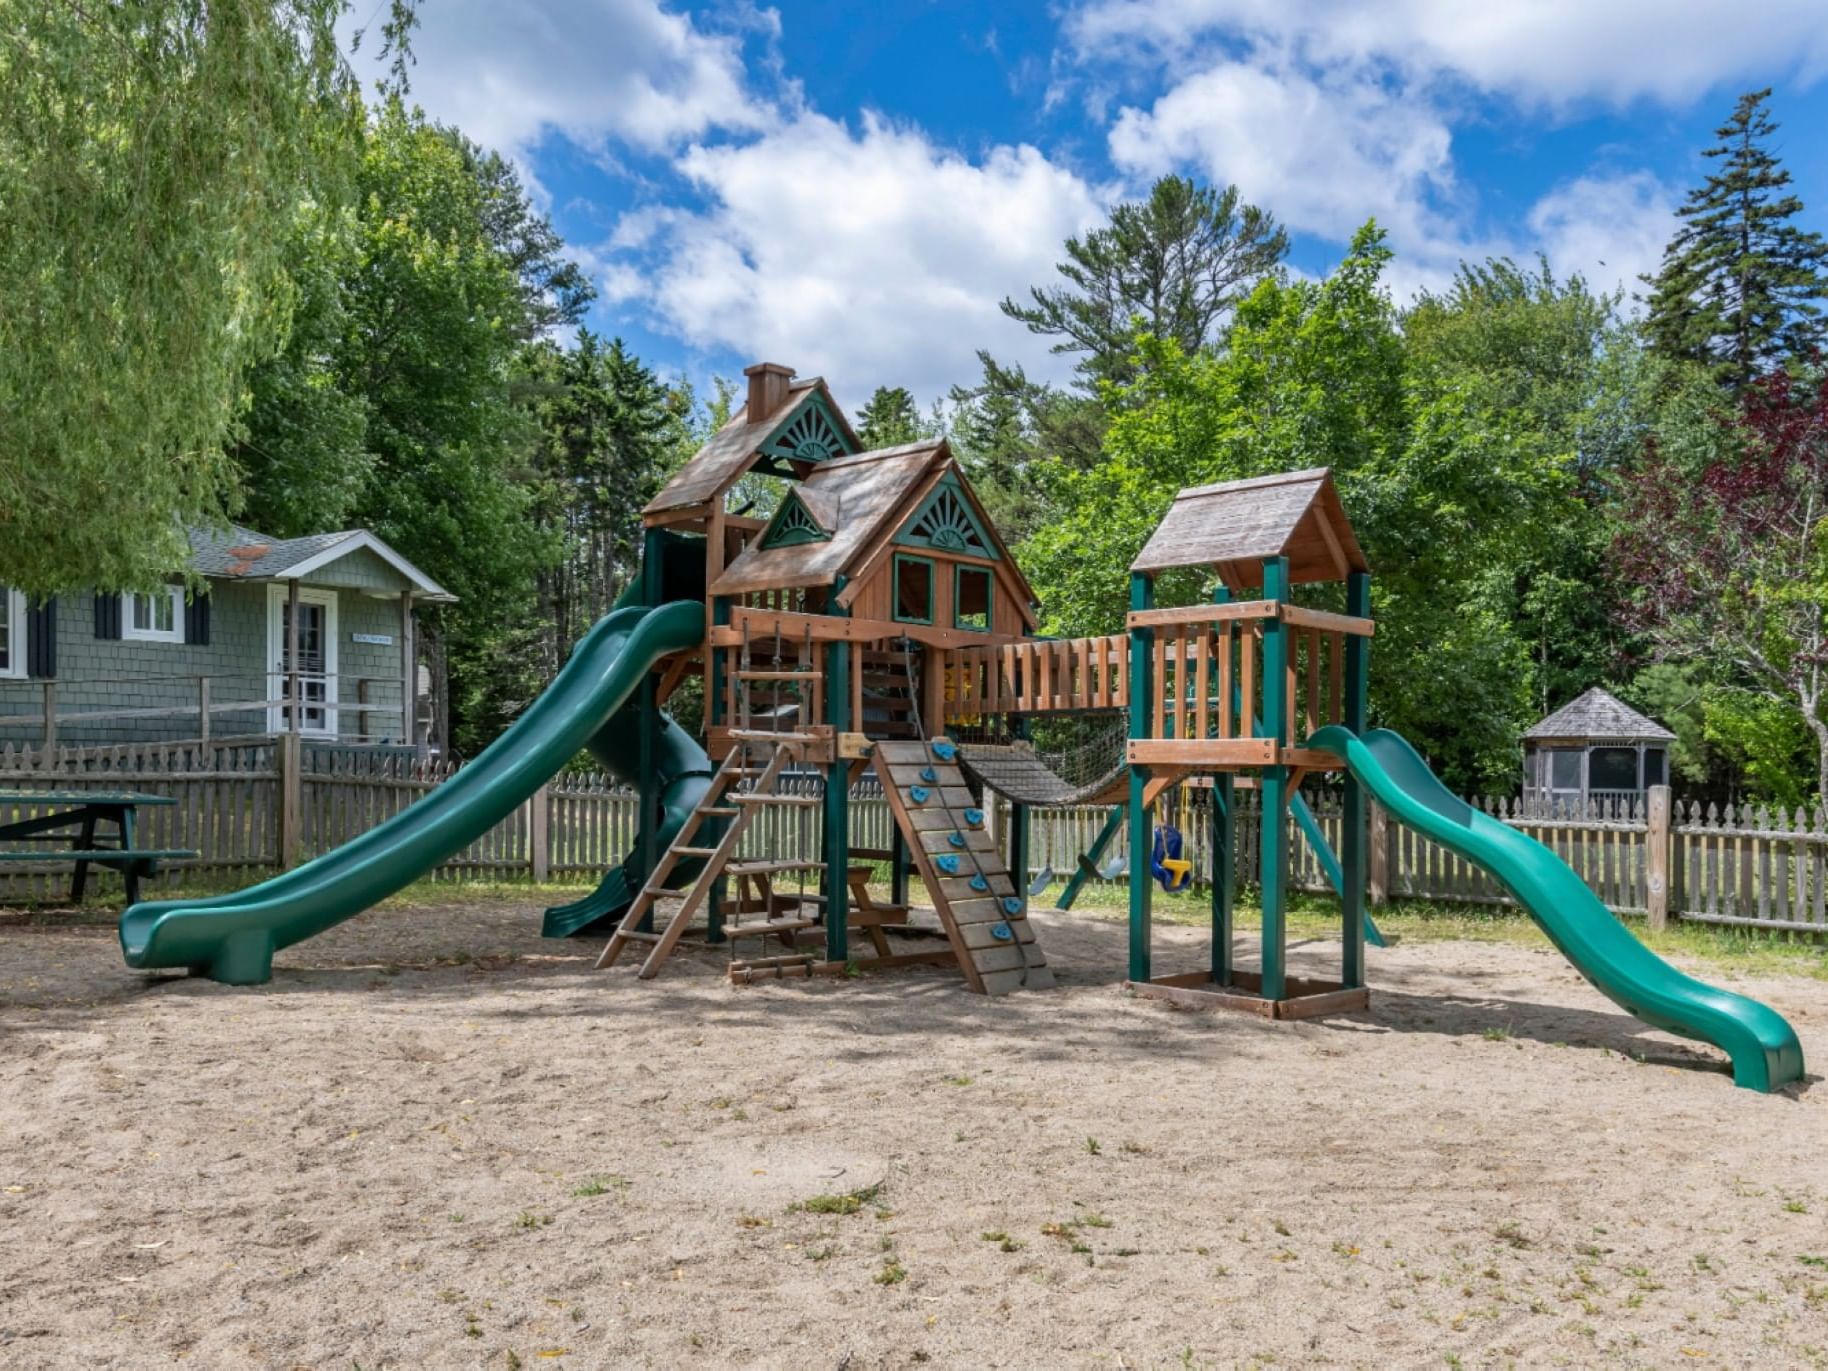 A sandy playground with swings and slides at The Bethel Inn Resort & Suites